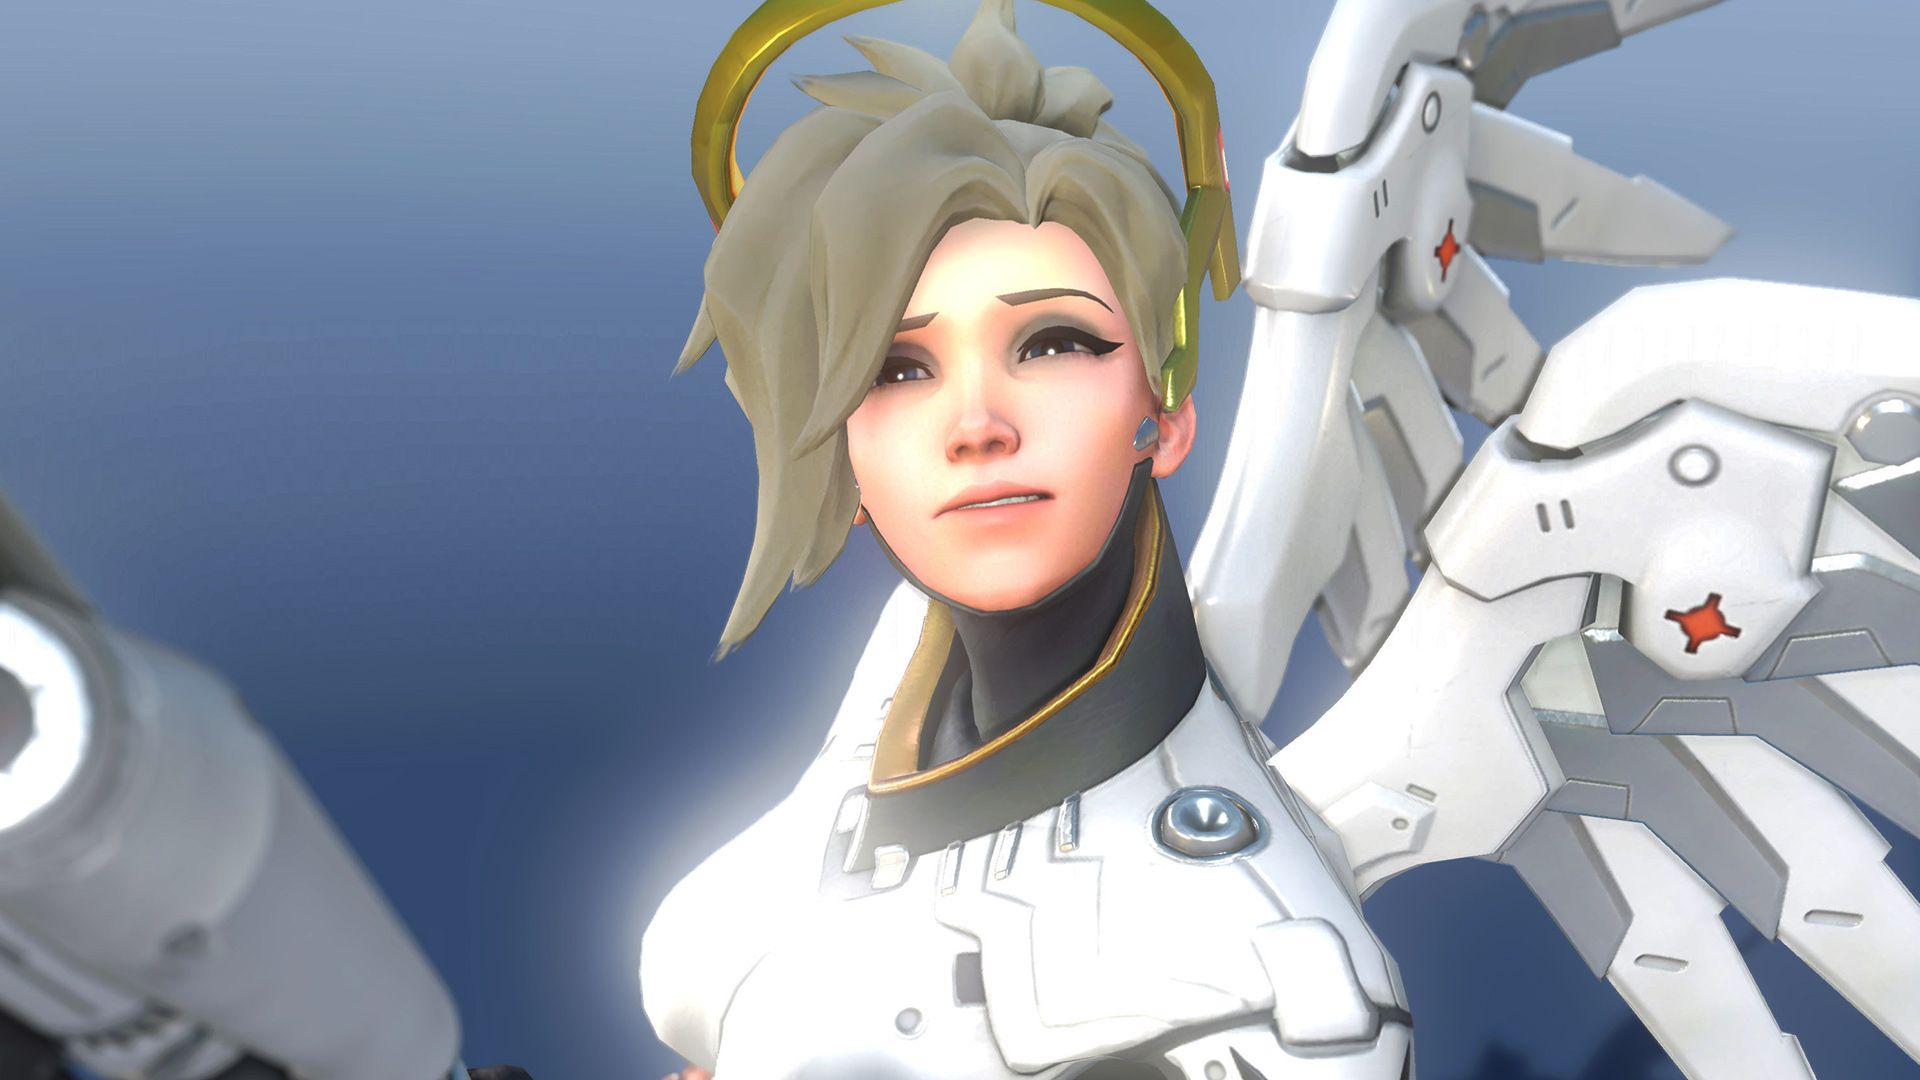 Overwatch 2 Mercy abilities: Tips and tricks